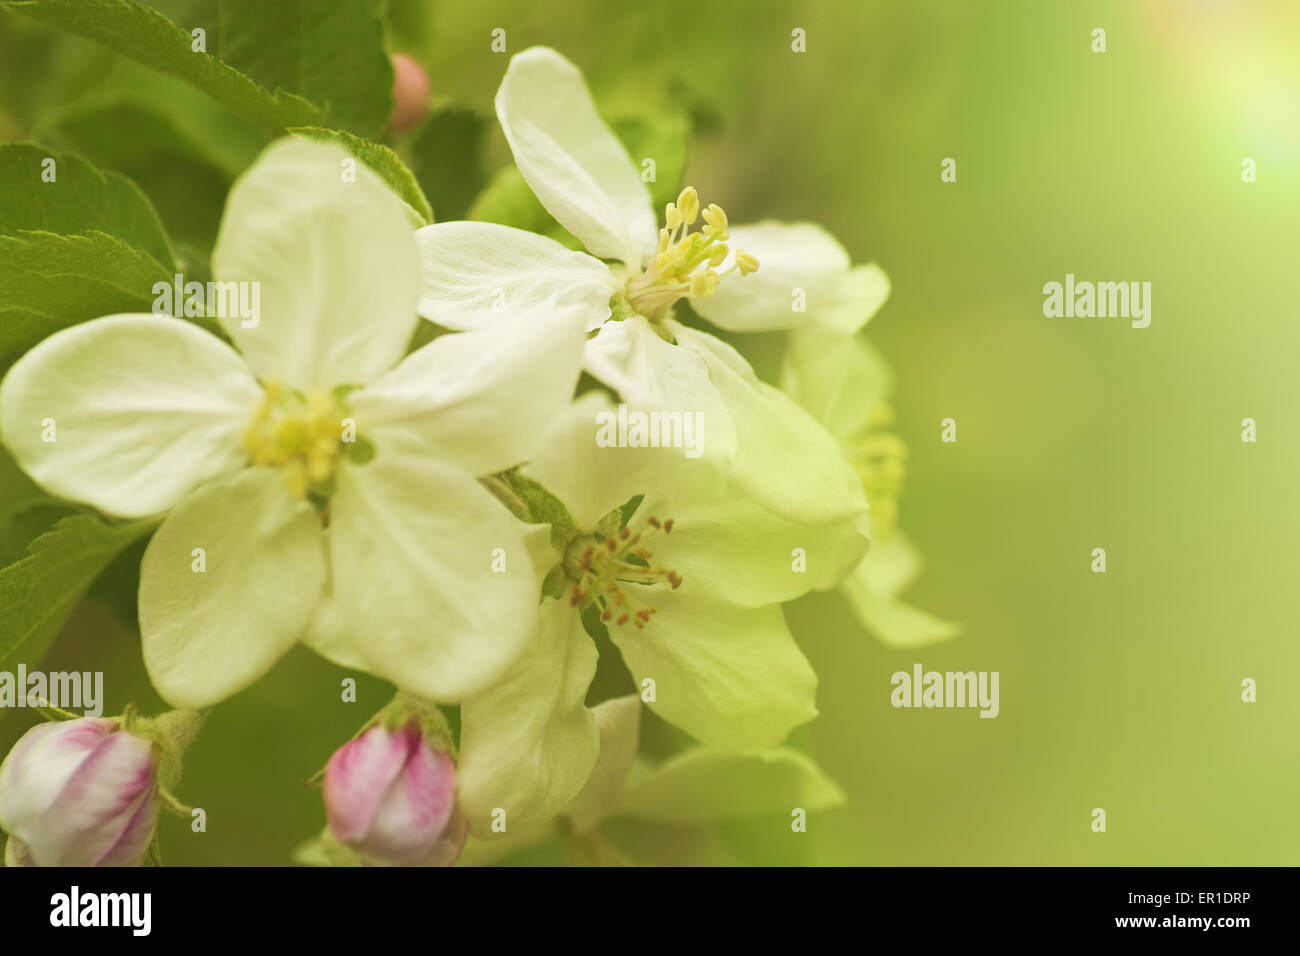 Apple flowers, abstract spring backgrounds Stock Photo